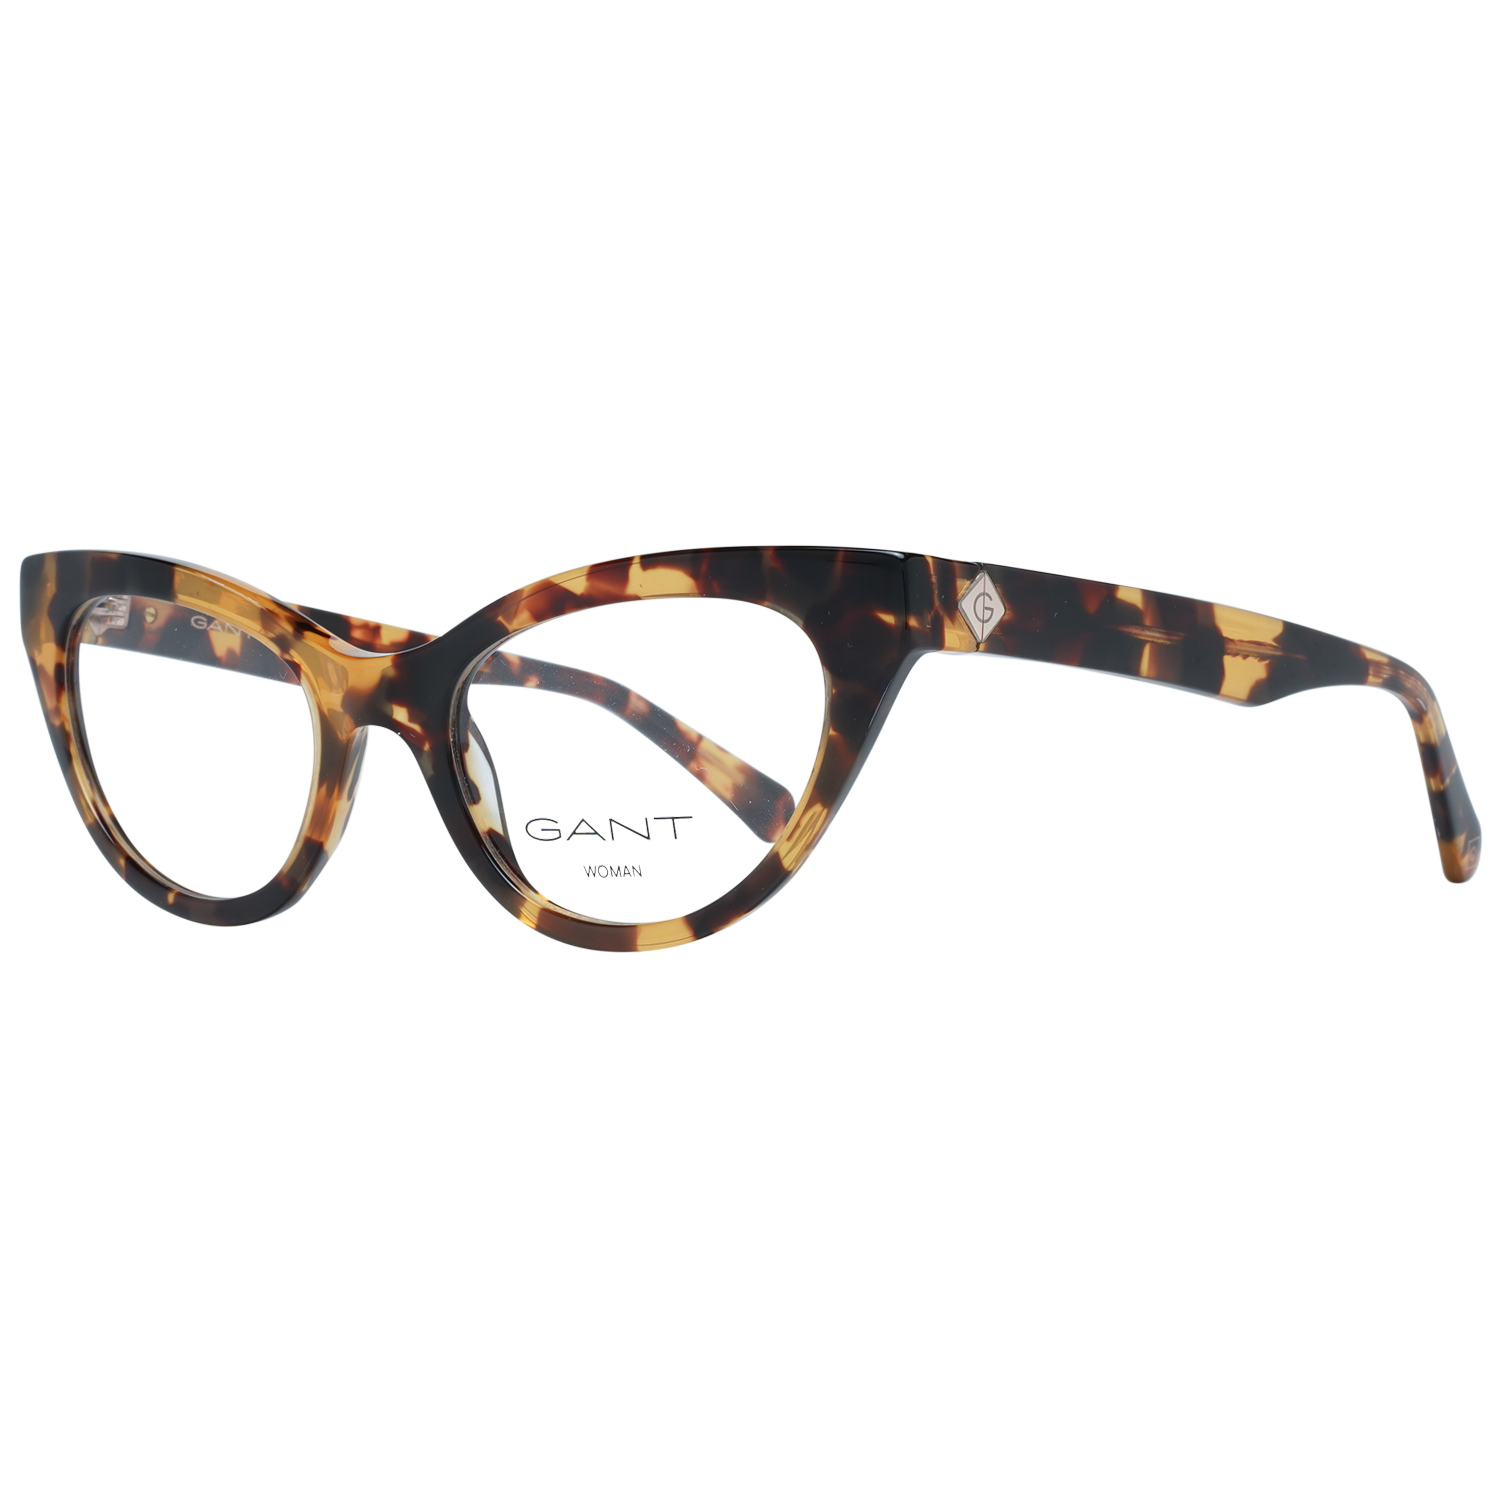 GenderWomenMain colorBrownFrame colorBrownFrame materialPlasticSize51-20-140Lenses width51mmLenses heigth36mmBridge length20mmFrame width143mmTemple length140mmShipment includesCase, Cleaning clothStyleFull-RimSpring hingeNo